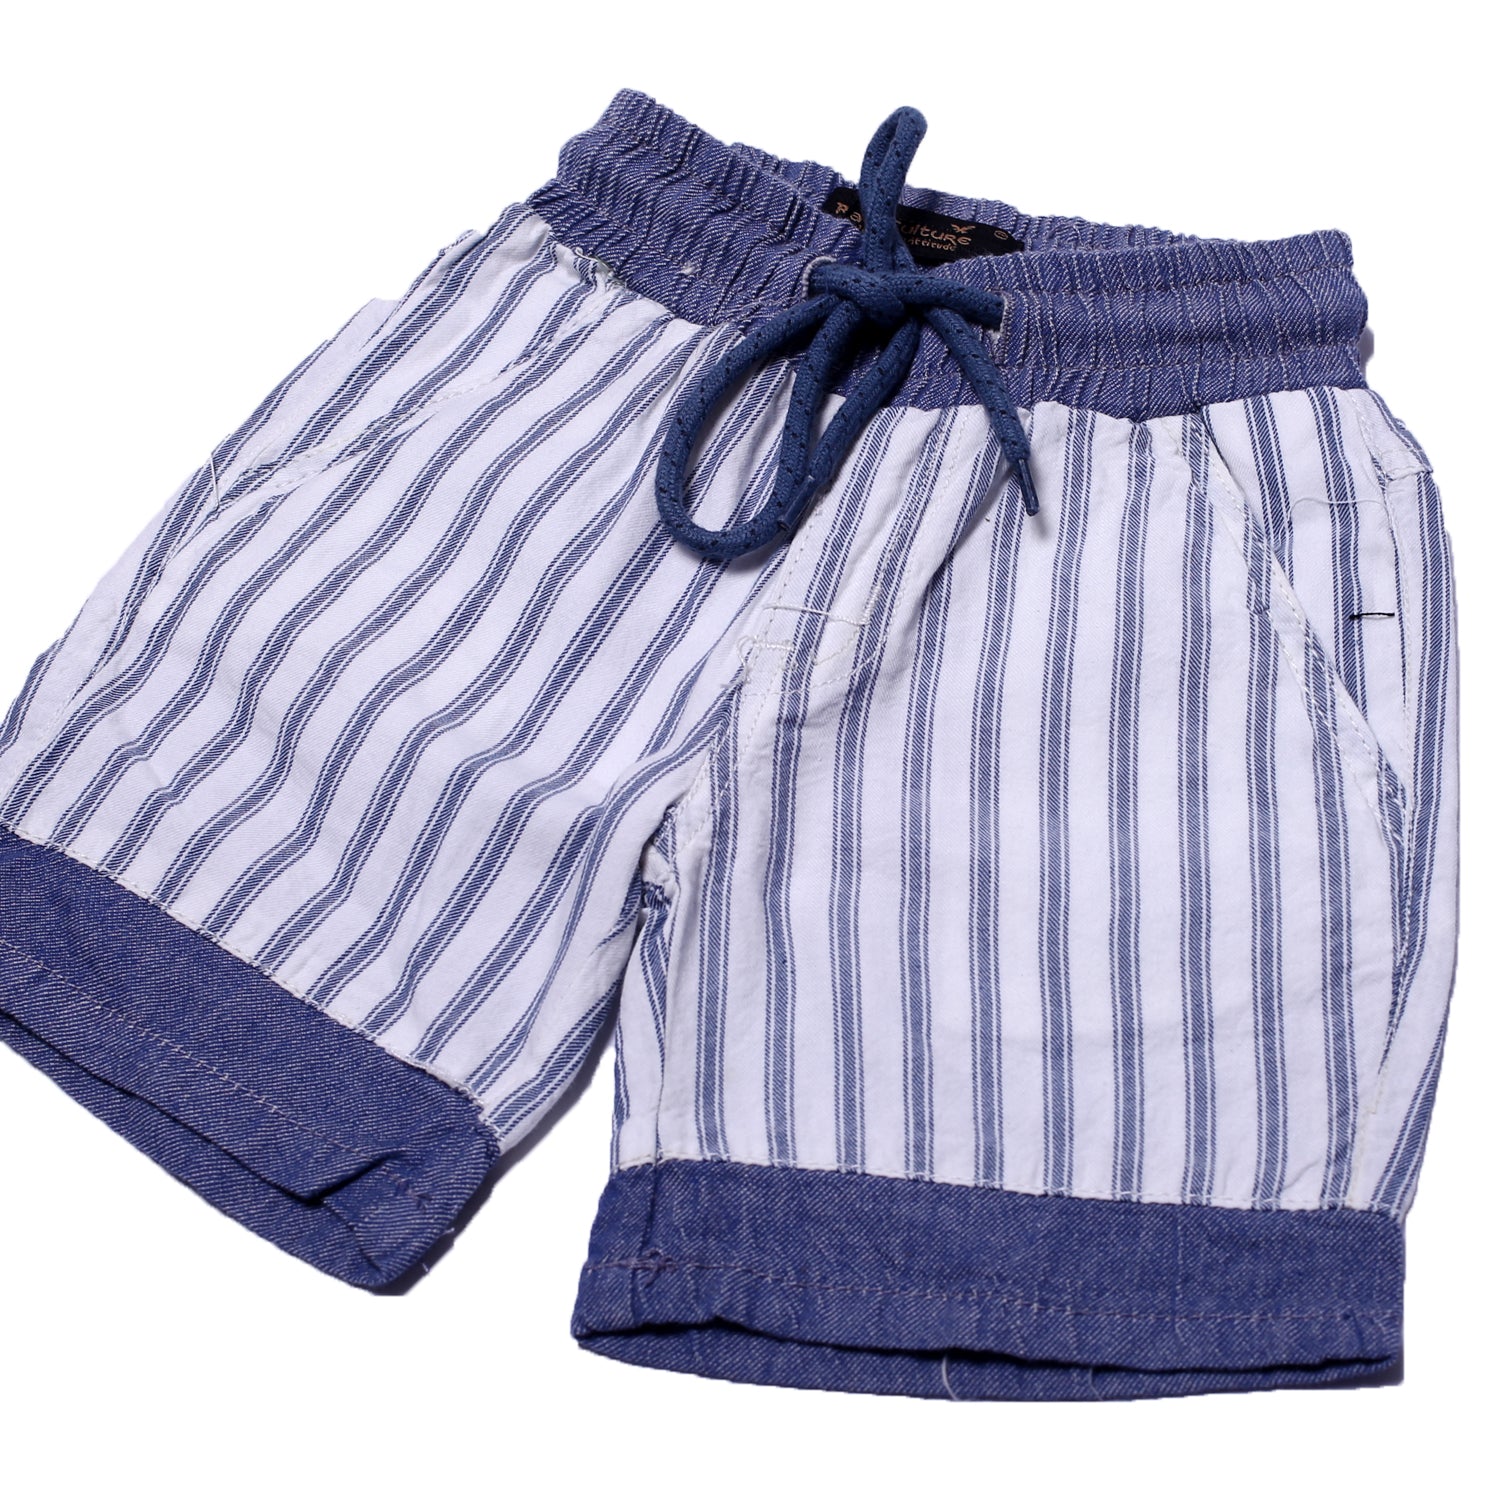 NEW WHITE WITH BLUE STRIPES SHORTS 29